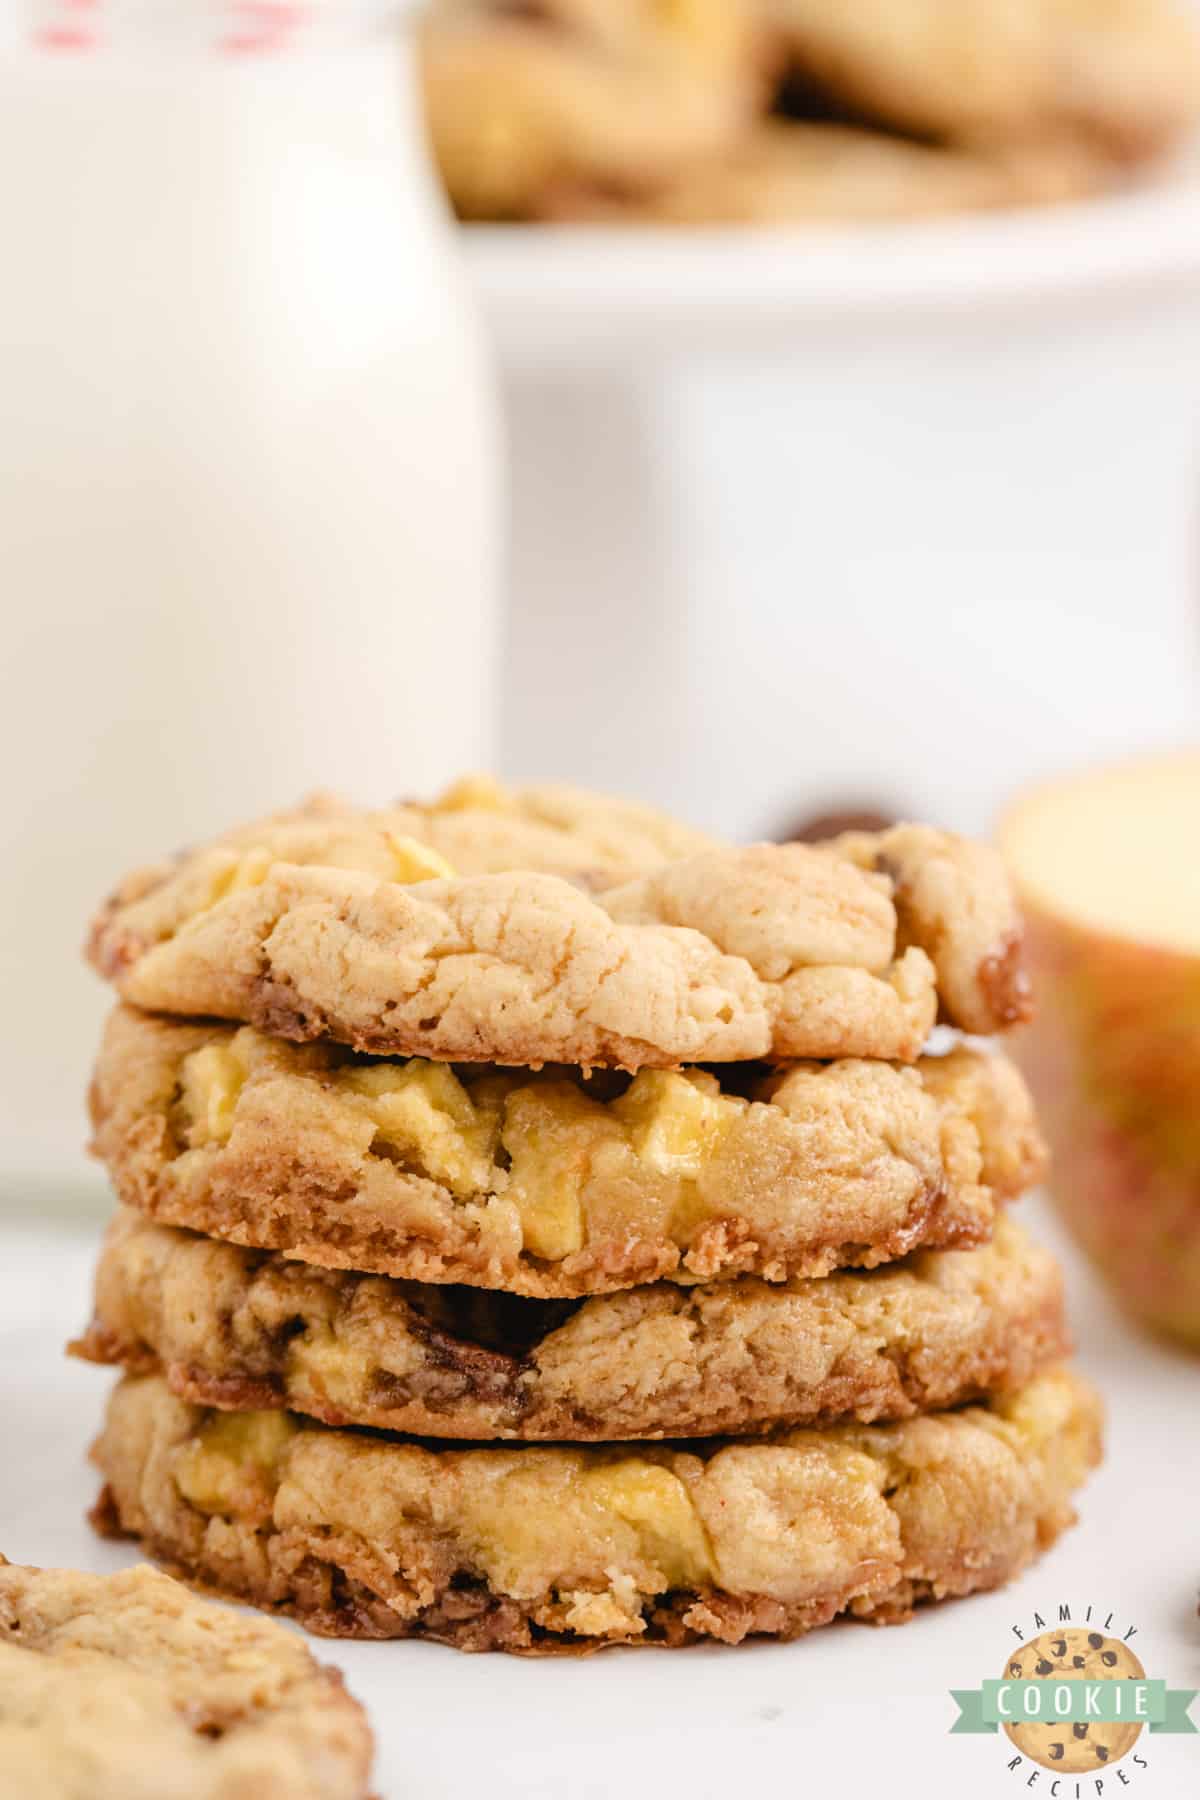 Stack of cake mix cookies made with apples and chocolate caramel candies